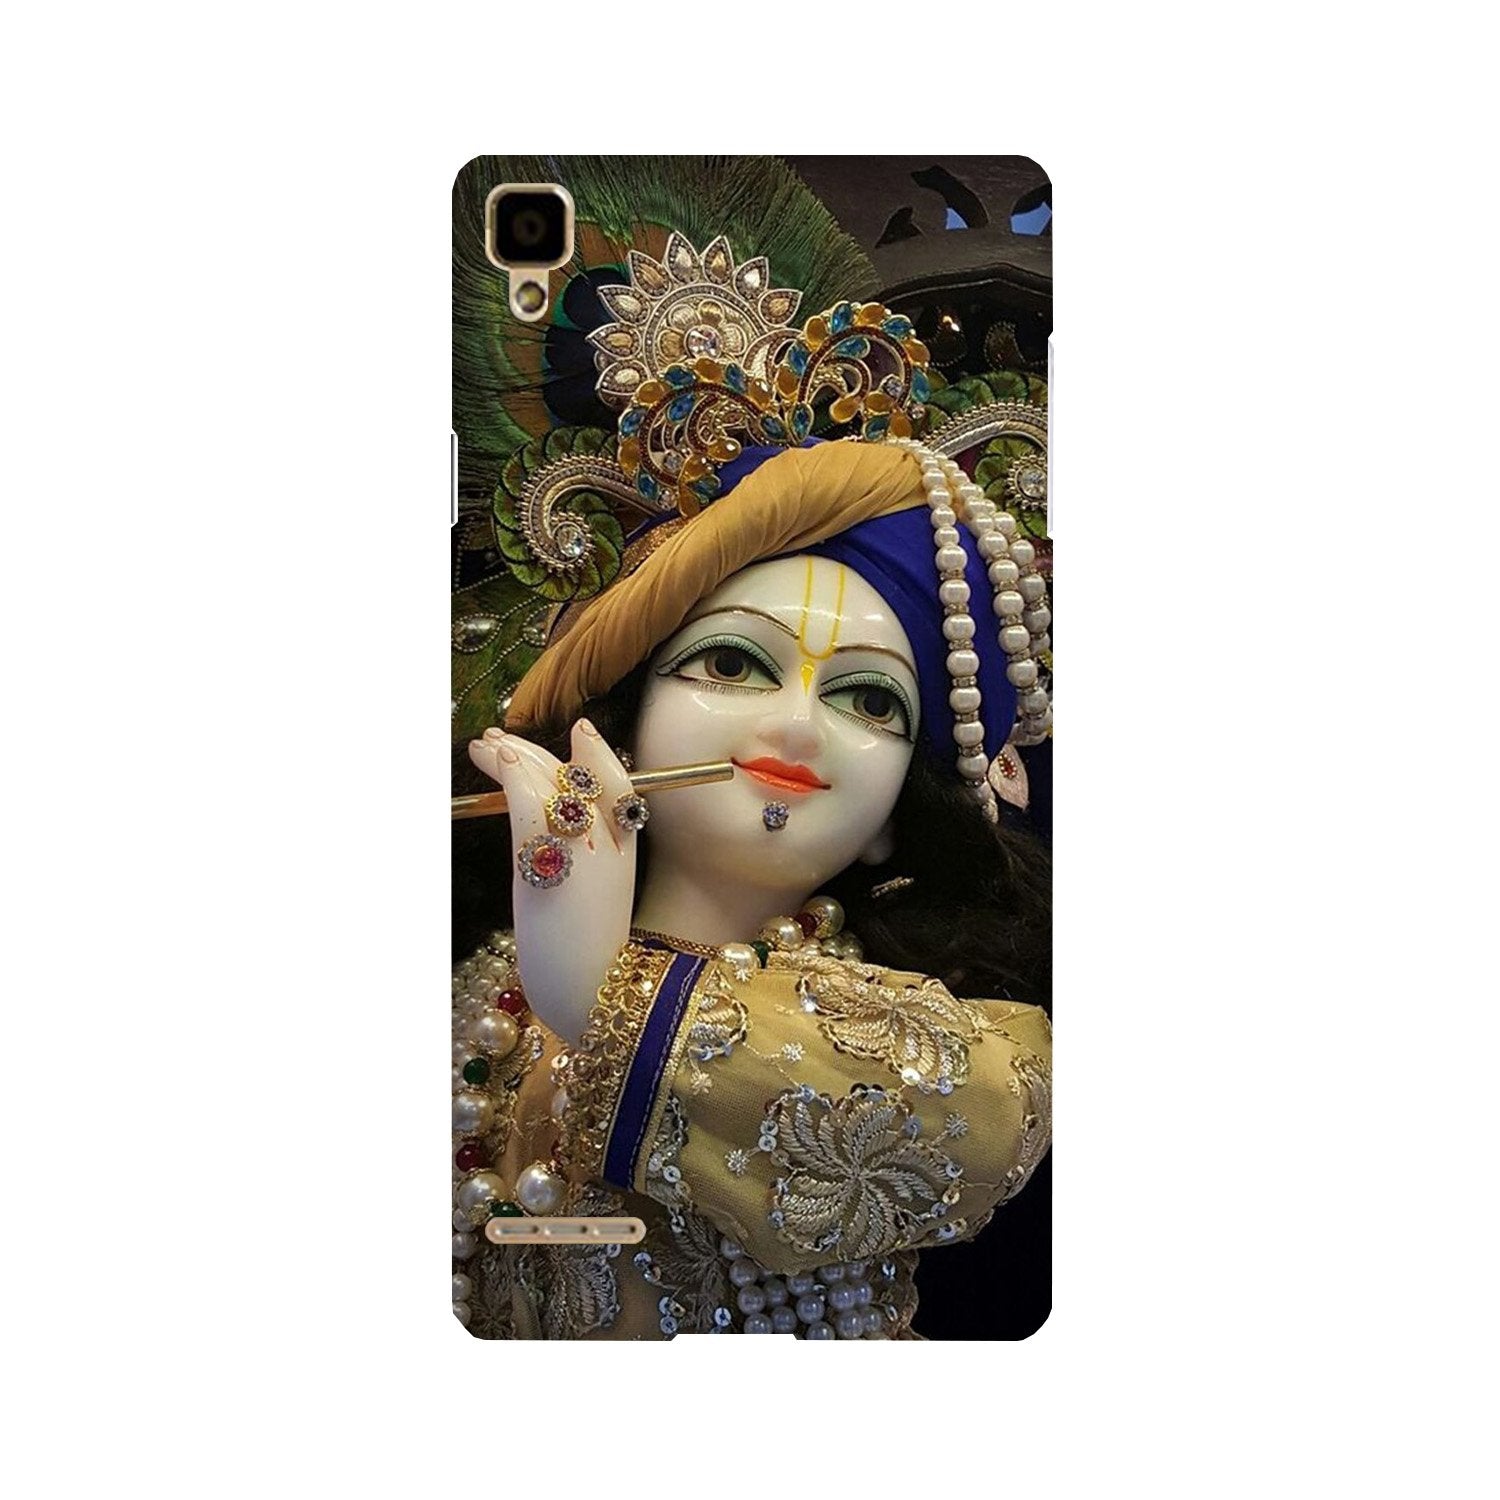 Lord Krishna3 Case for Oppo F1